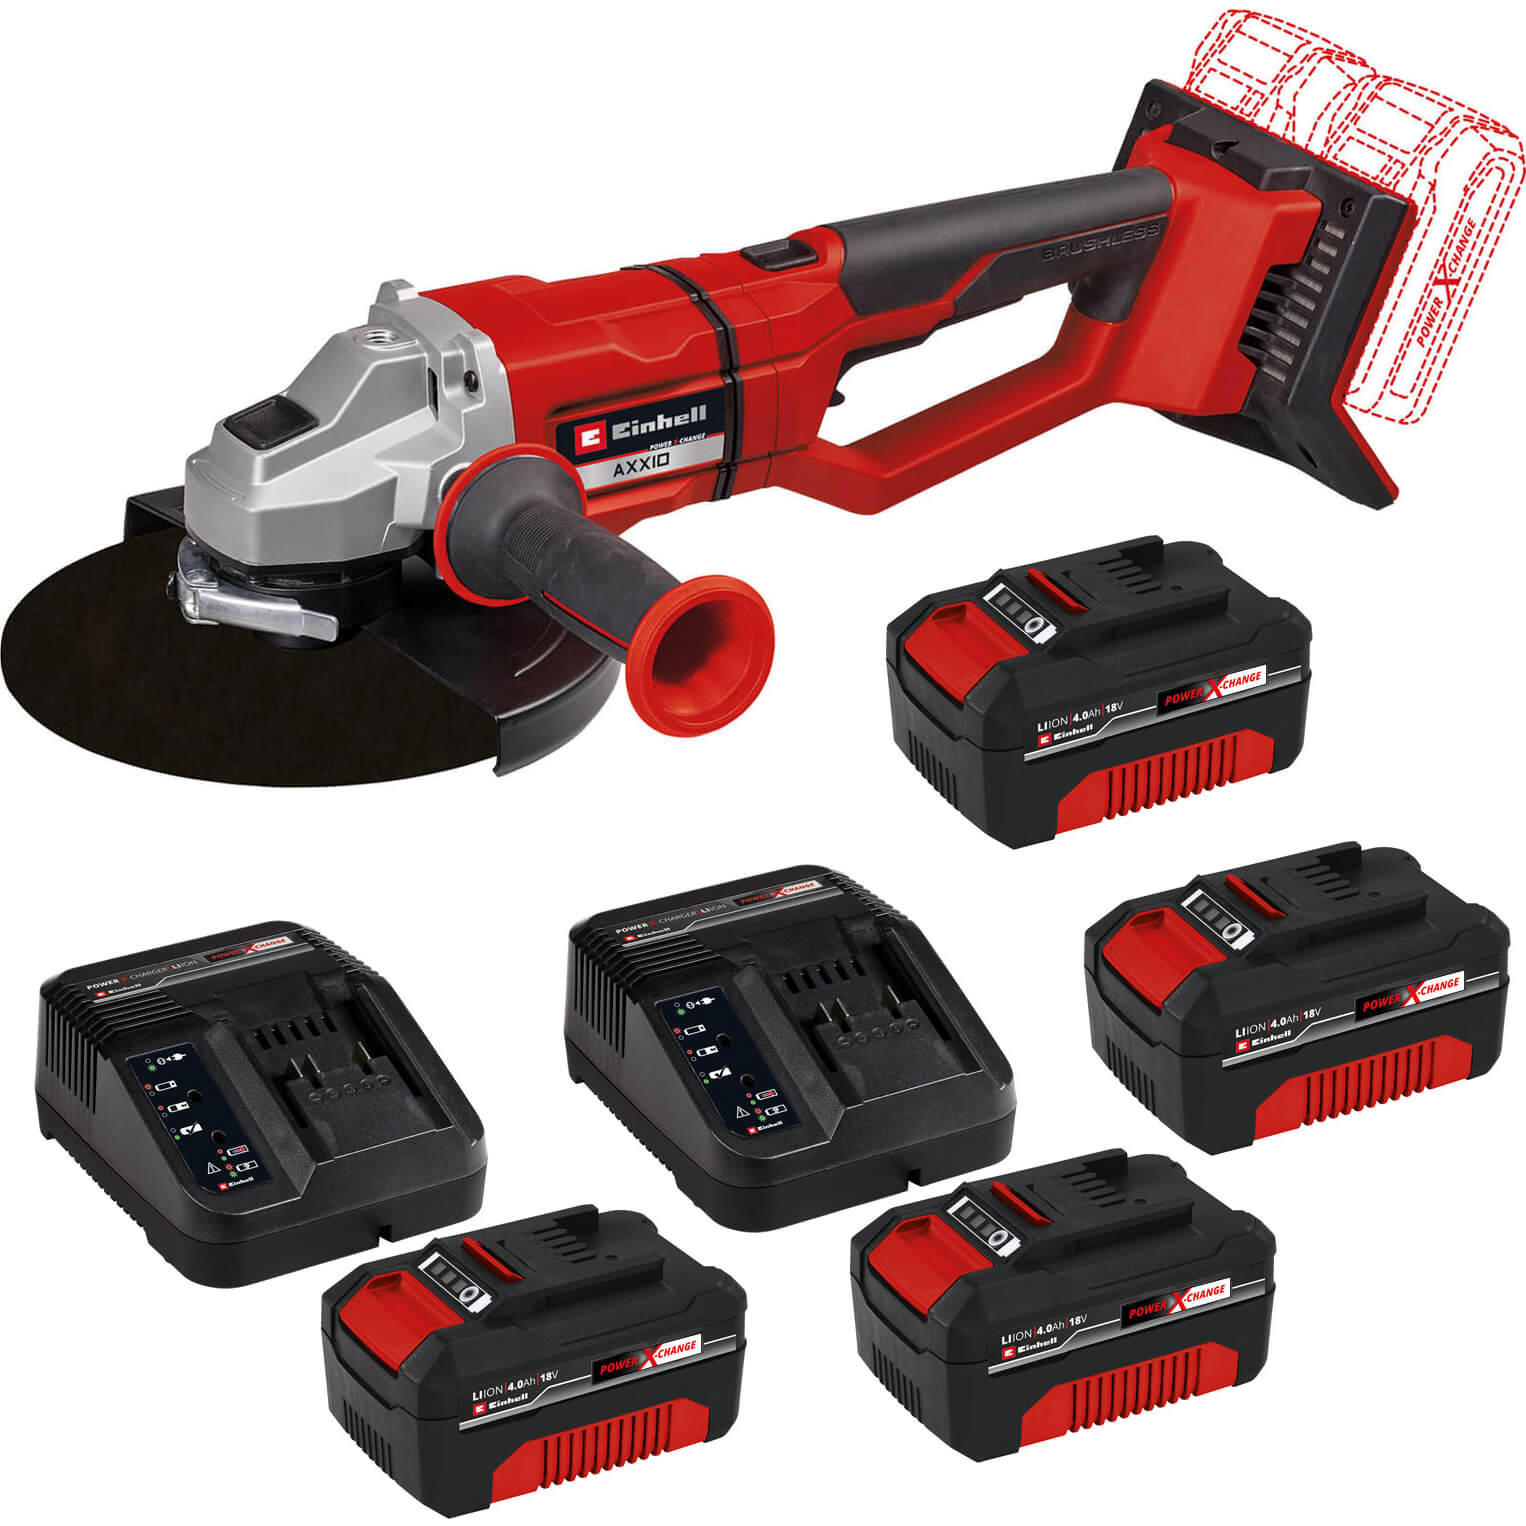 Image of Einhell AXXIO 36/230 Q 36v Cordless Brushless Angle Grinder 230mm 4 x 4ah Li-ion Charger No Case